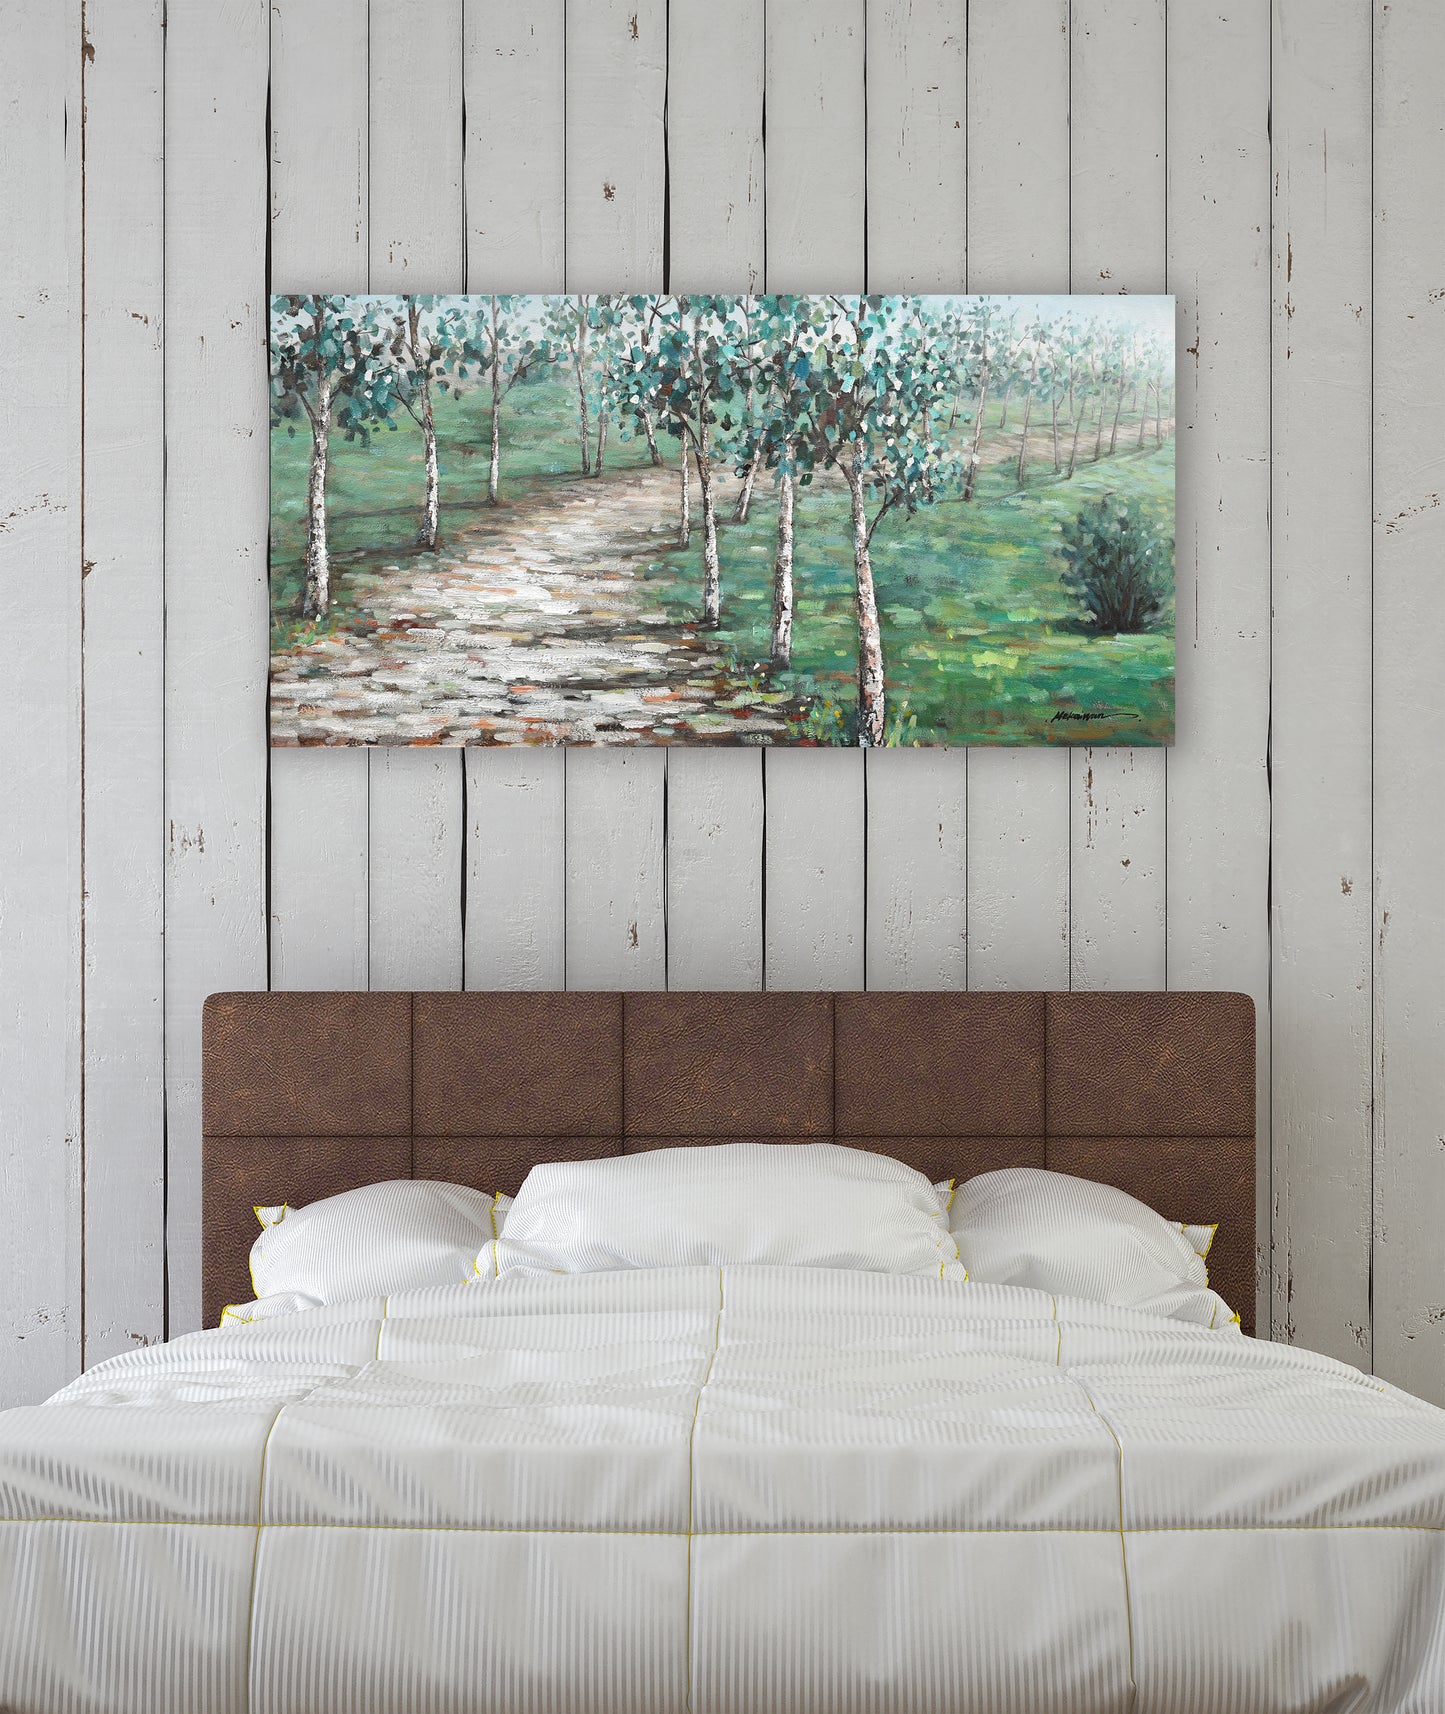 Green country road - Oil Painting on Wrapped Canvas, Wall art for living room, bedroom, office